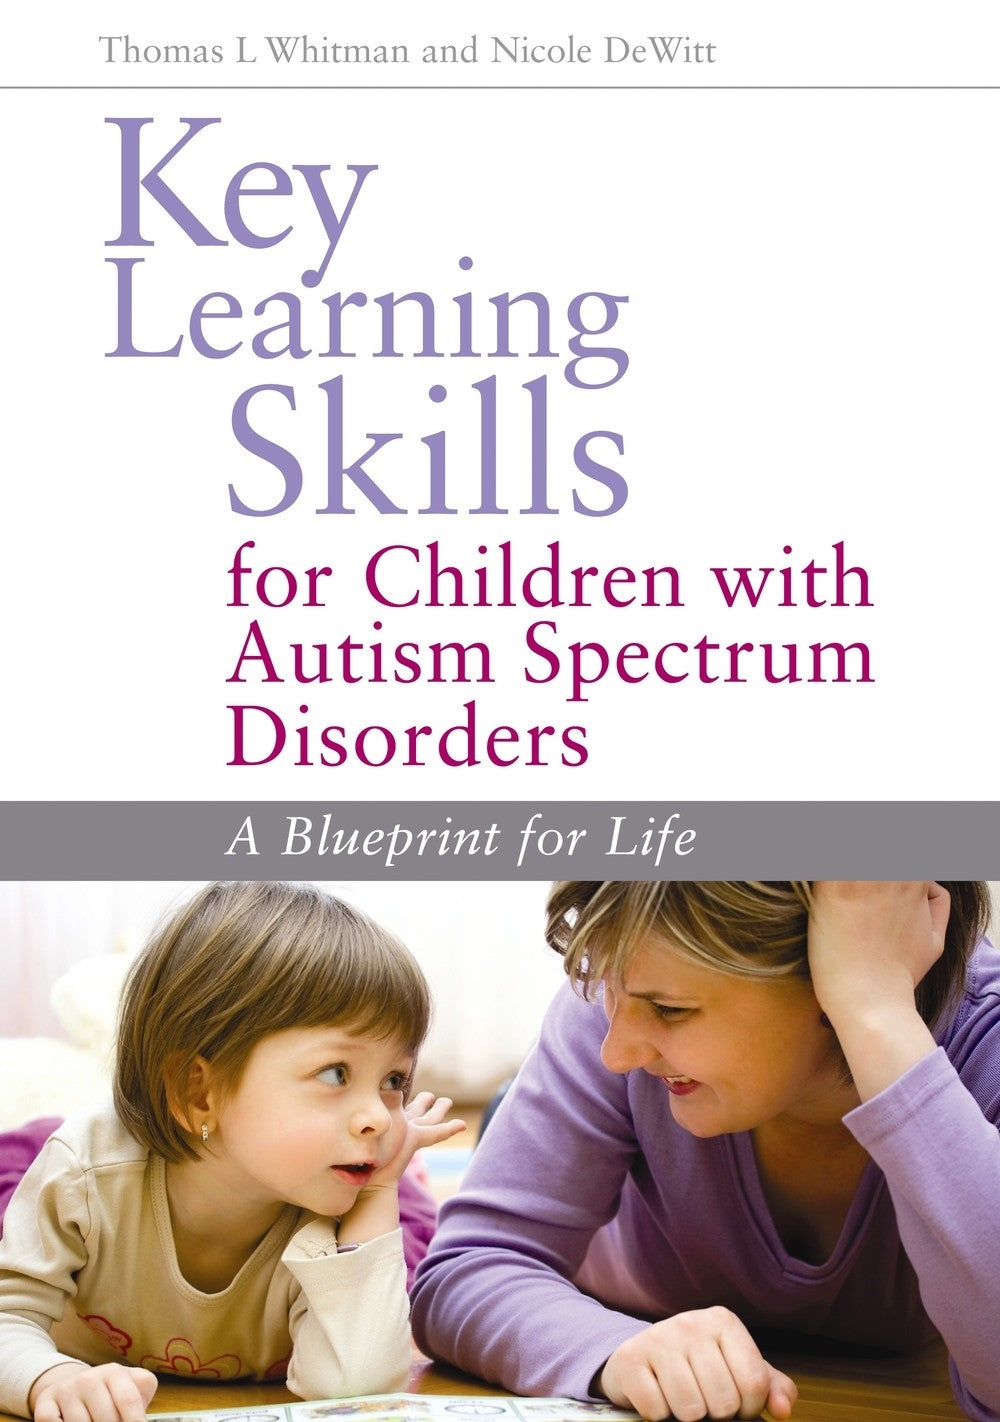 Key Learning Skills for Children with Autism Spectrum Disorders by Nicole DeWitt, Thomas L. Whitman